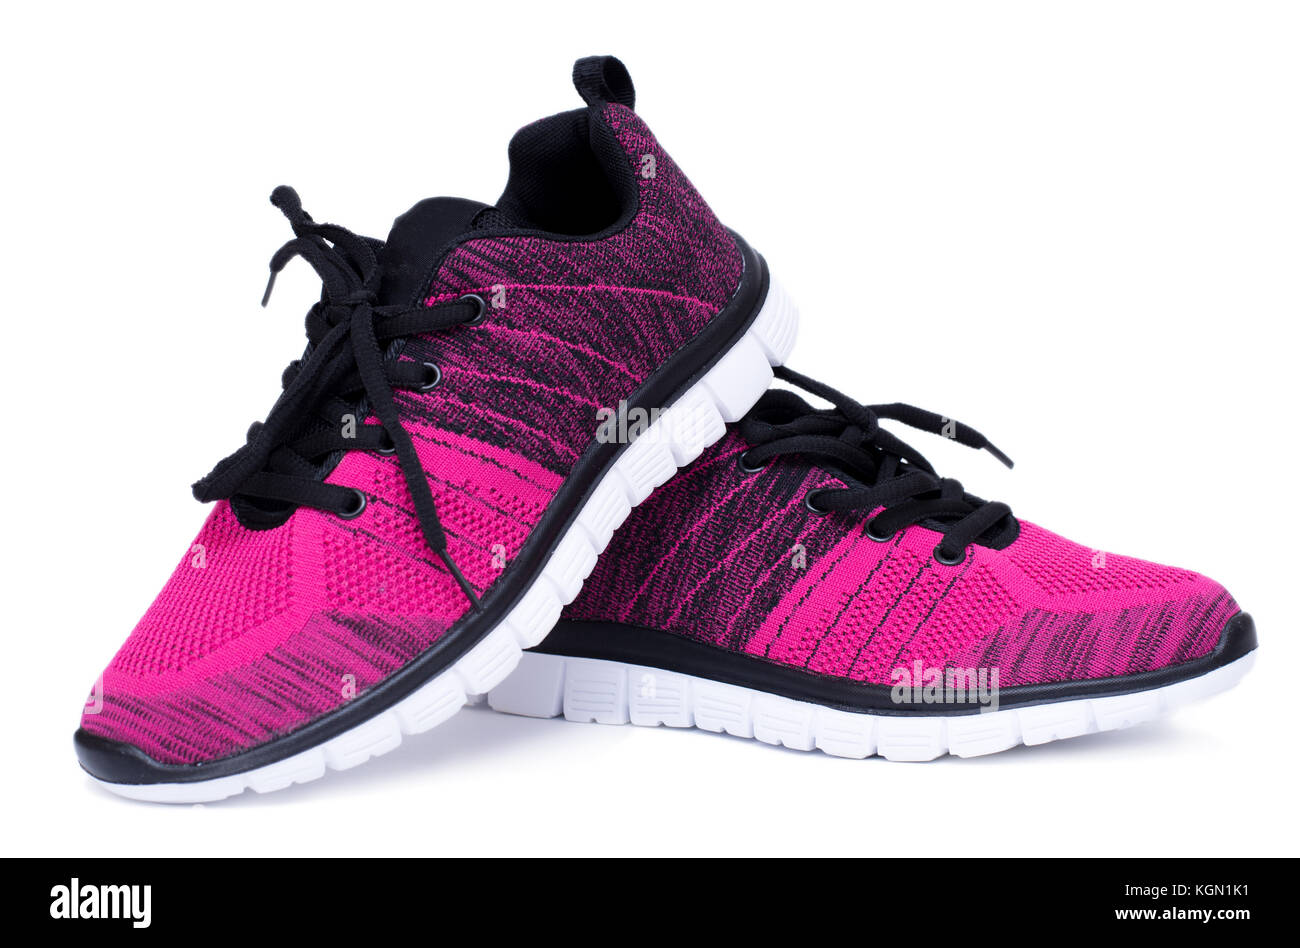 Pair of pink and black sport woman shoes isolated on white background Stock Photo